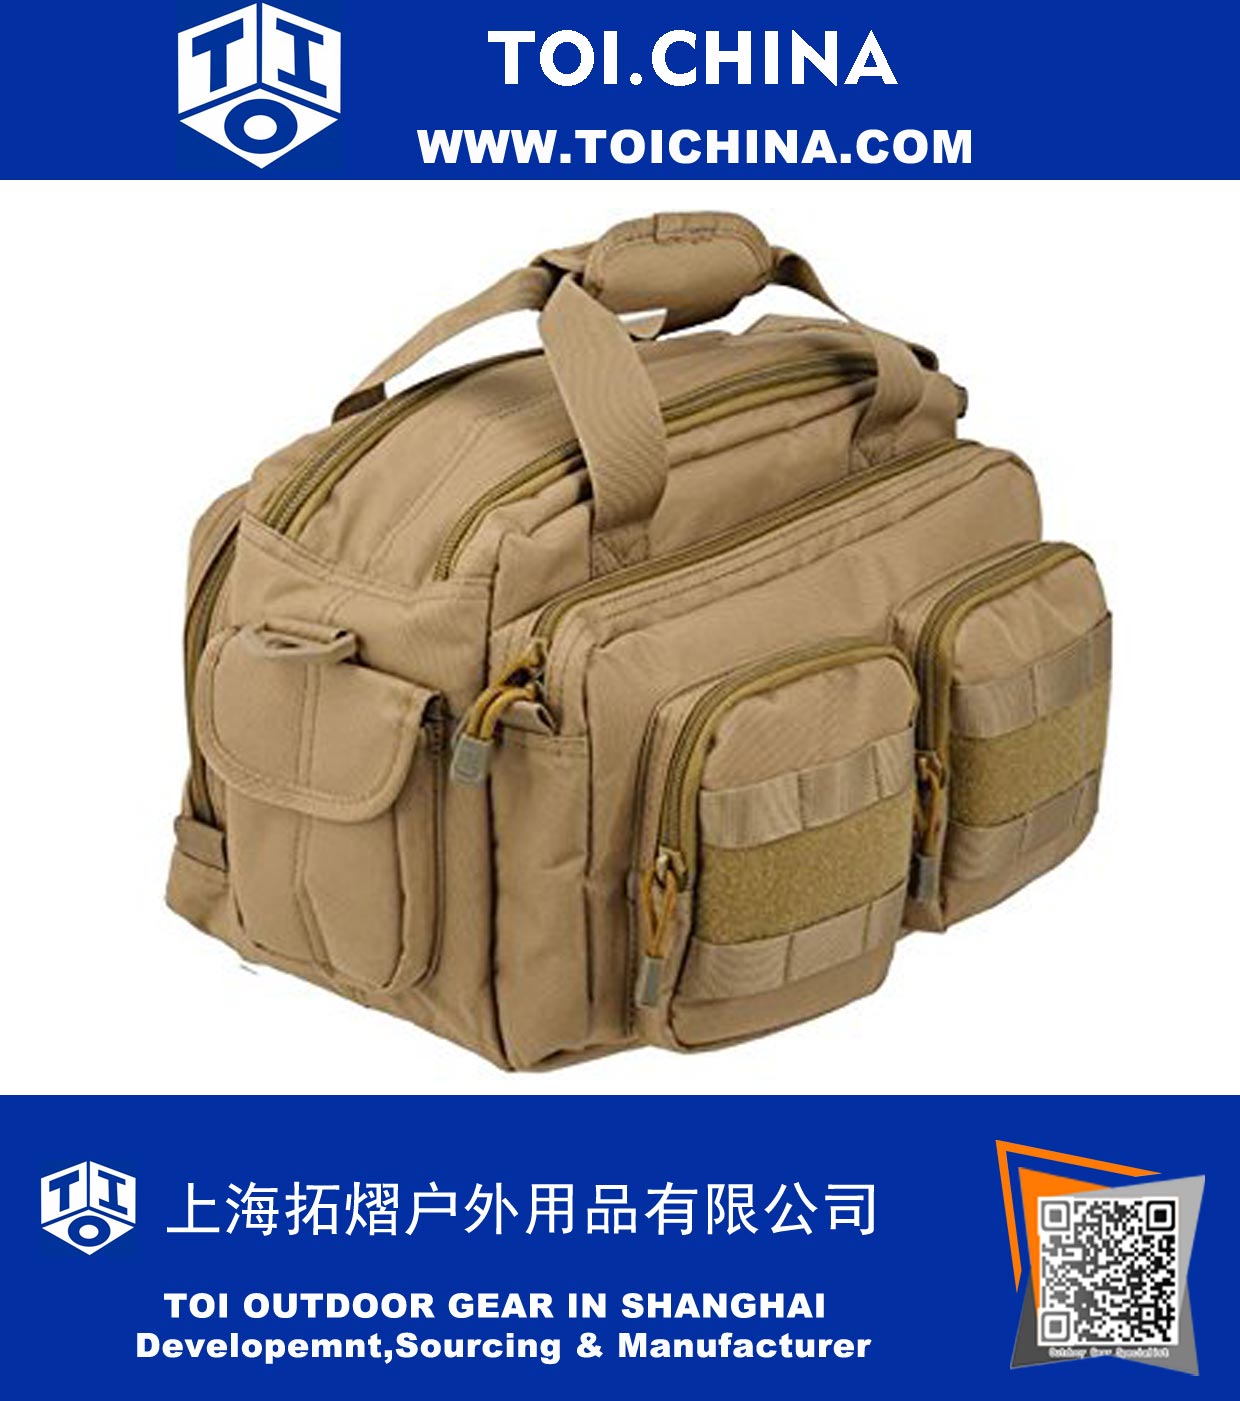 Tactical Padded Pistol Case Shooting Range Bag with MOLLE Webbing